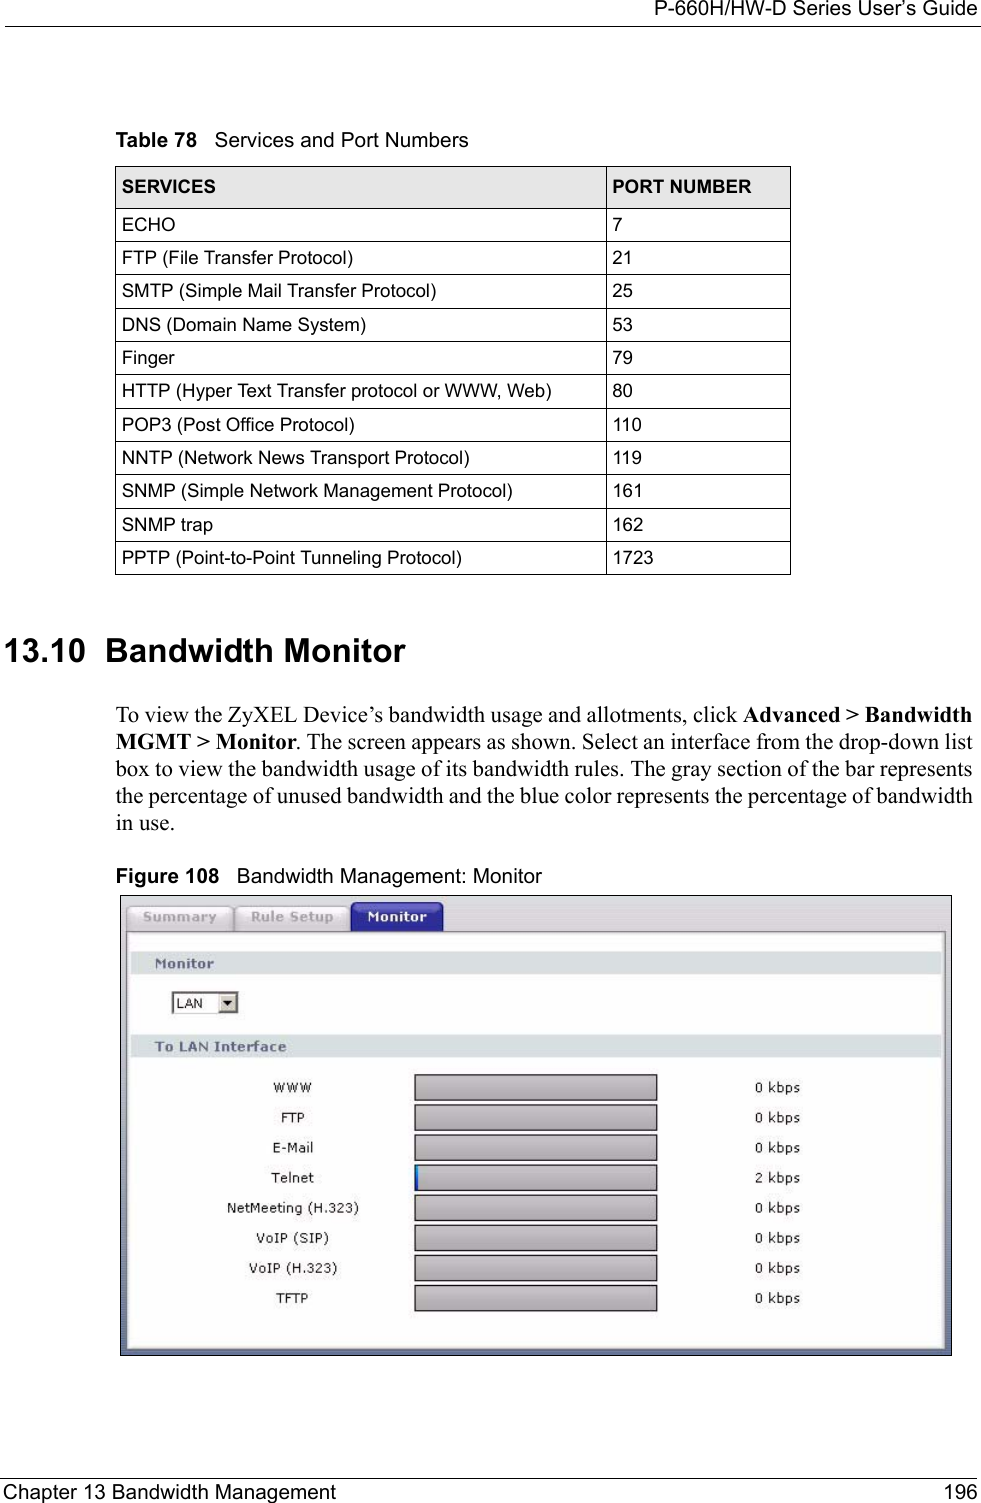 P-660H/HW-D Series User’s GuideChapter 13 Bandwidth Management 19613.10  Bandwidth Monitor  To view the ZyXEL Device’s bandwidth usage and allotments, click Advanced &gt; Bandwidth MGMT &gt; Monitor. The screen appears as shown. Select an interface from the drop-down list box to view the bandwidth usage of its bandwidth rules. The gray section of the bar represents the percentage of unused bandwidth and the blue color represents the percentage of bandwidth in use. Figure 108   Bandwidth Management: Monitor Table 78   Services and Port NumbersSERVICES PORT NUMBERECHO 7FTP (File Transfer Protocol) 21SMTP (Simple Mail Transfer Protocol) 25DNS (Domain Name System) 53Finger 79HTTP (Hyper Text Transfer protocol or WWW, Web) 80POP3 (Post Office Protocol) 110NNTP (Network News Transport Protocol) 119SNMP (Simple Network Management Protocol) 161SNMP trap 162PPTP (Point-to-Point Tunneling Protocol) 1723